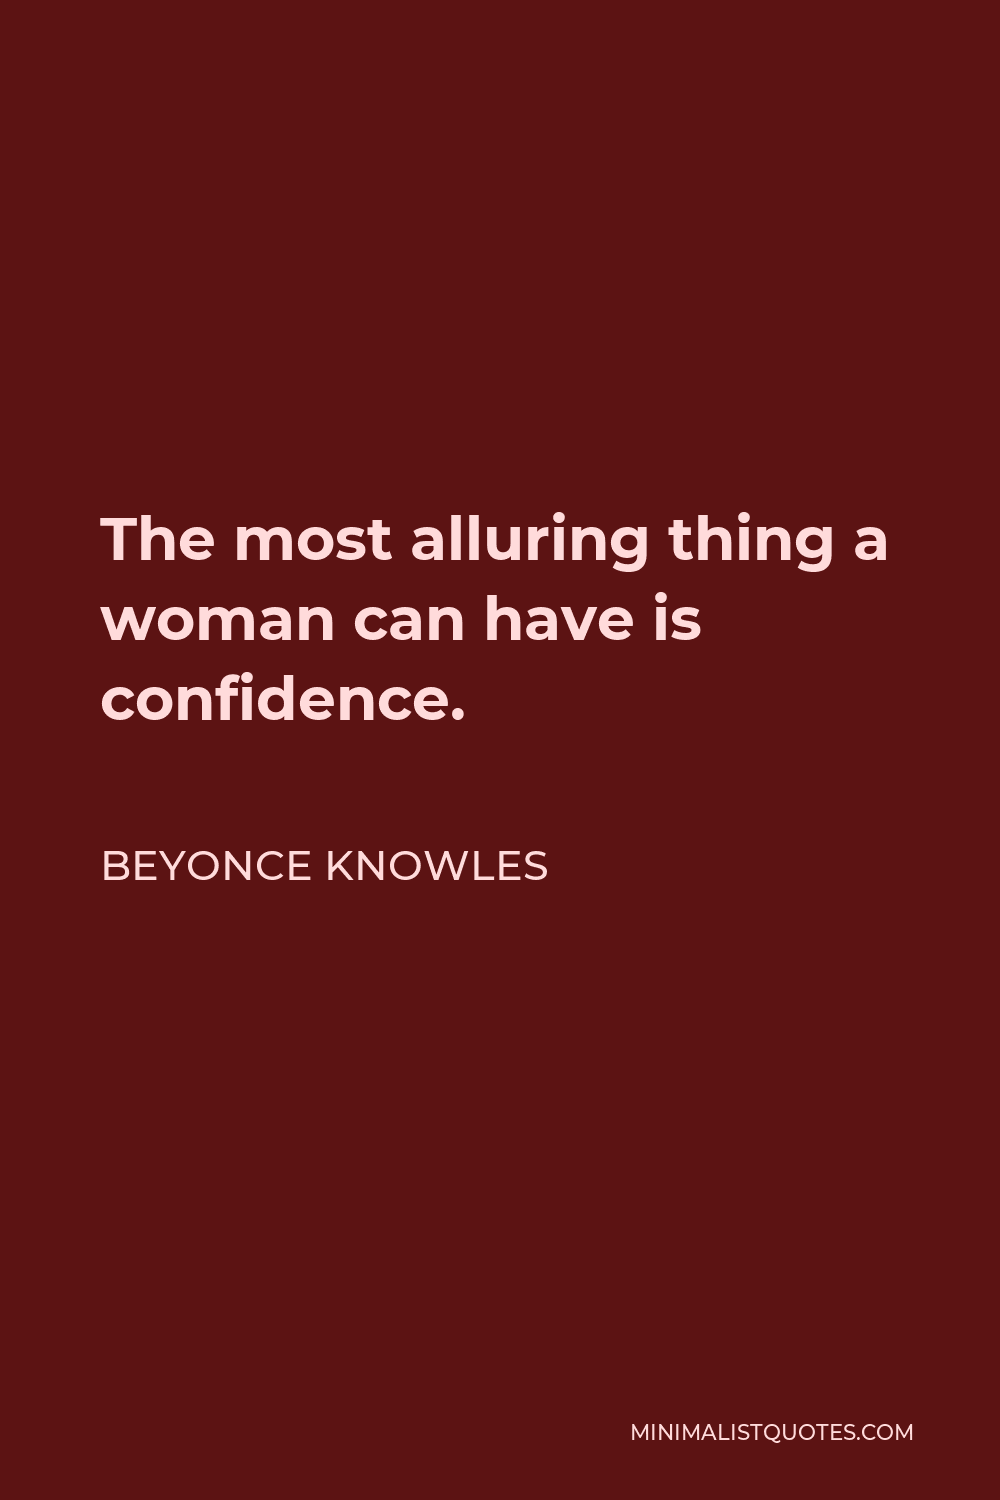 Beyonce Knowles Quote - The most alluring thing a woman can have is confidence.